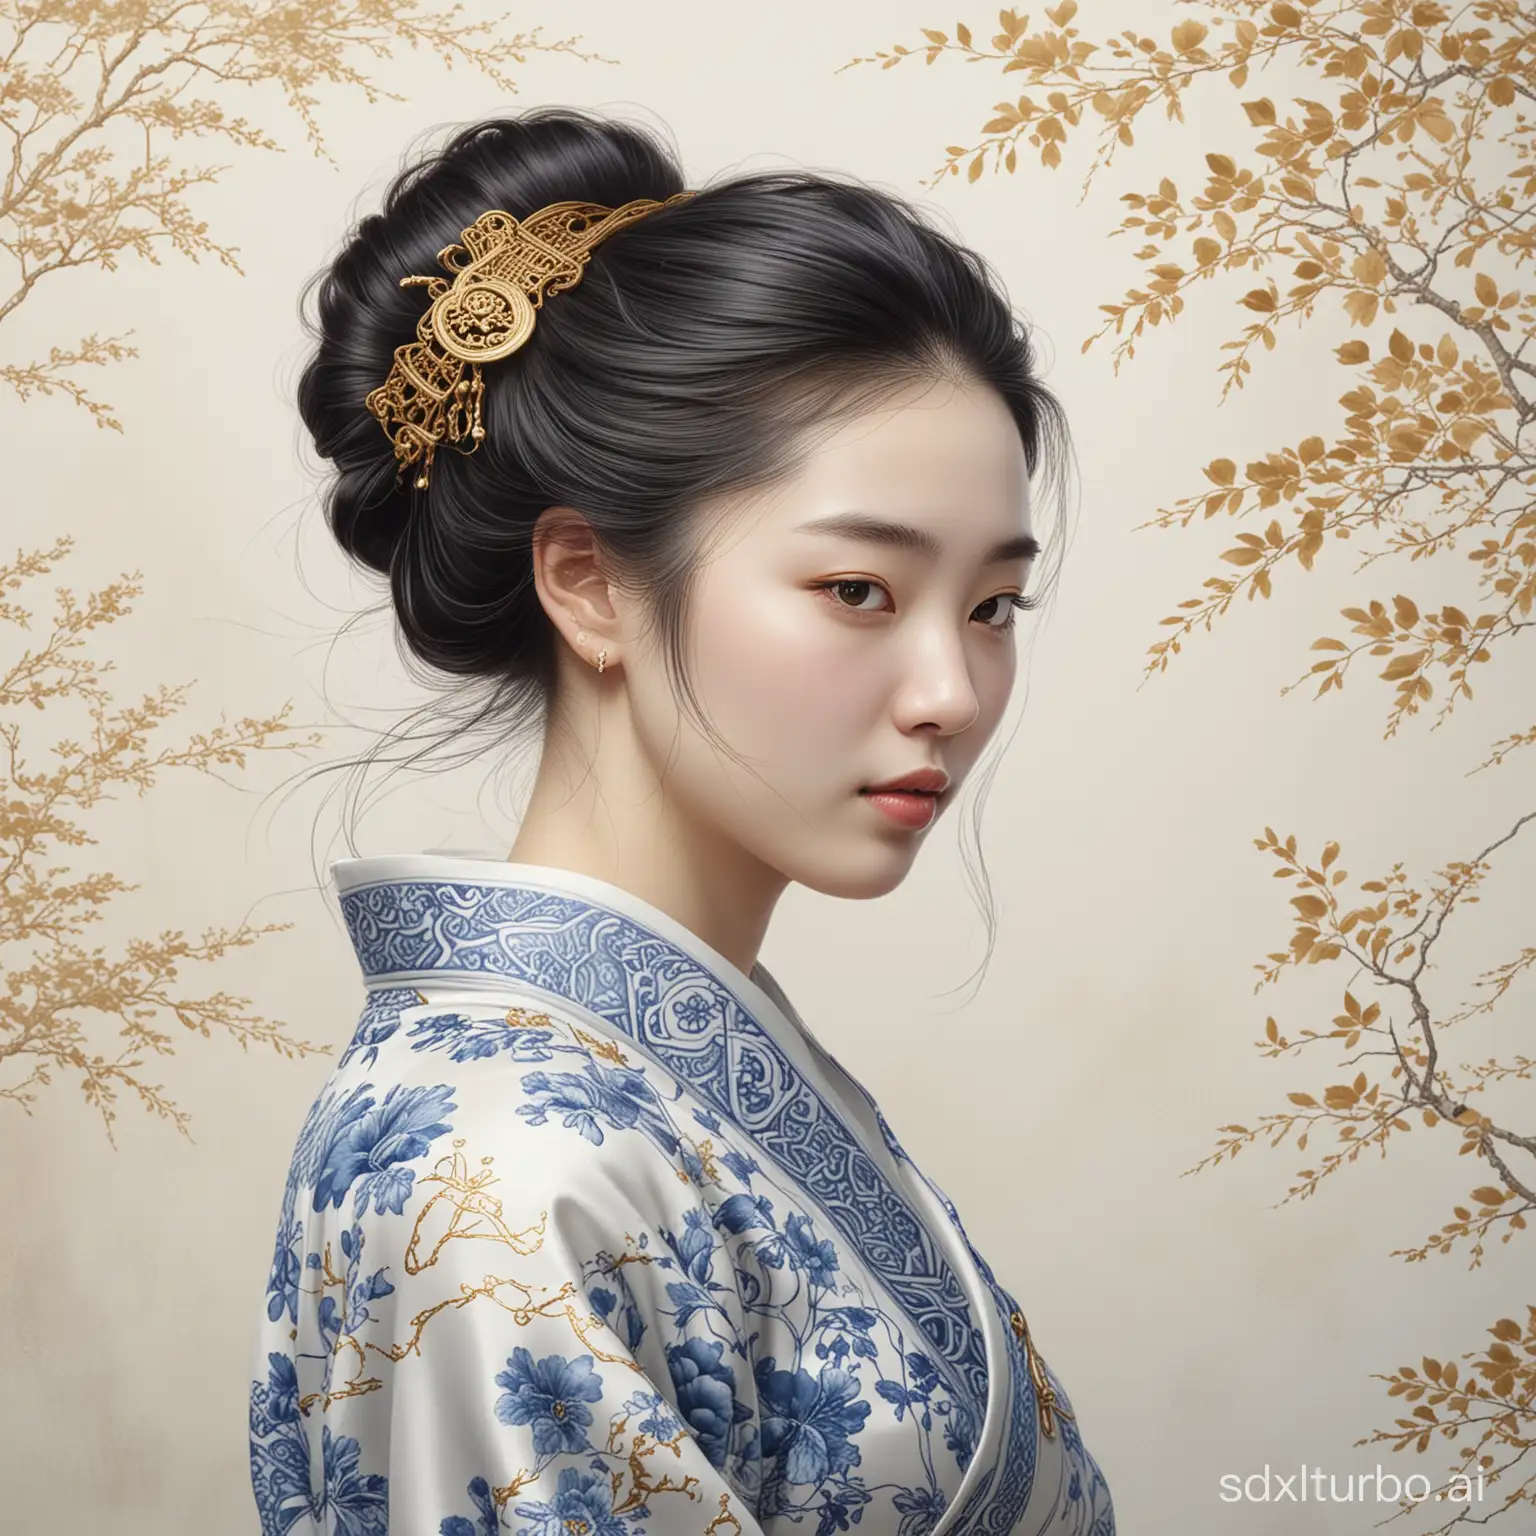 A blue and white porcelain material with golden cracks, in which there is an illustration of Woman in the style of Chinese silk thread, with delicate details. The background color is pale and clean, high detail, realism, depth of field, traditional drawing, realism